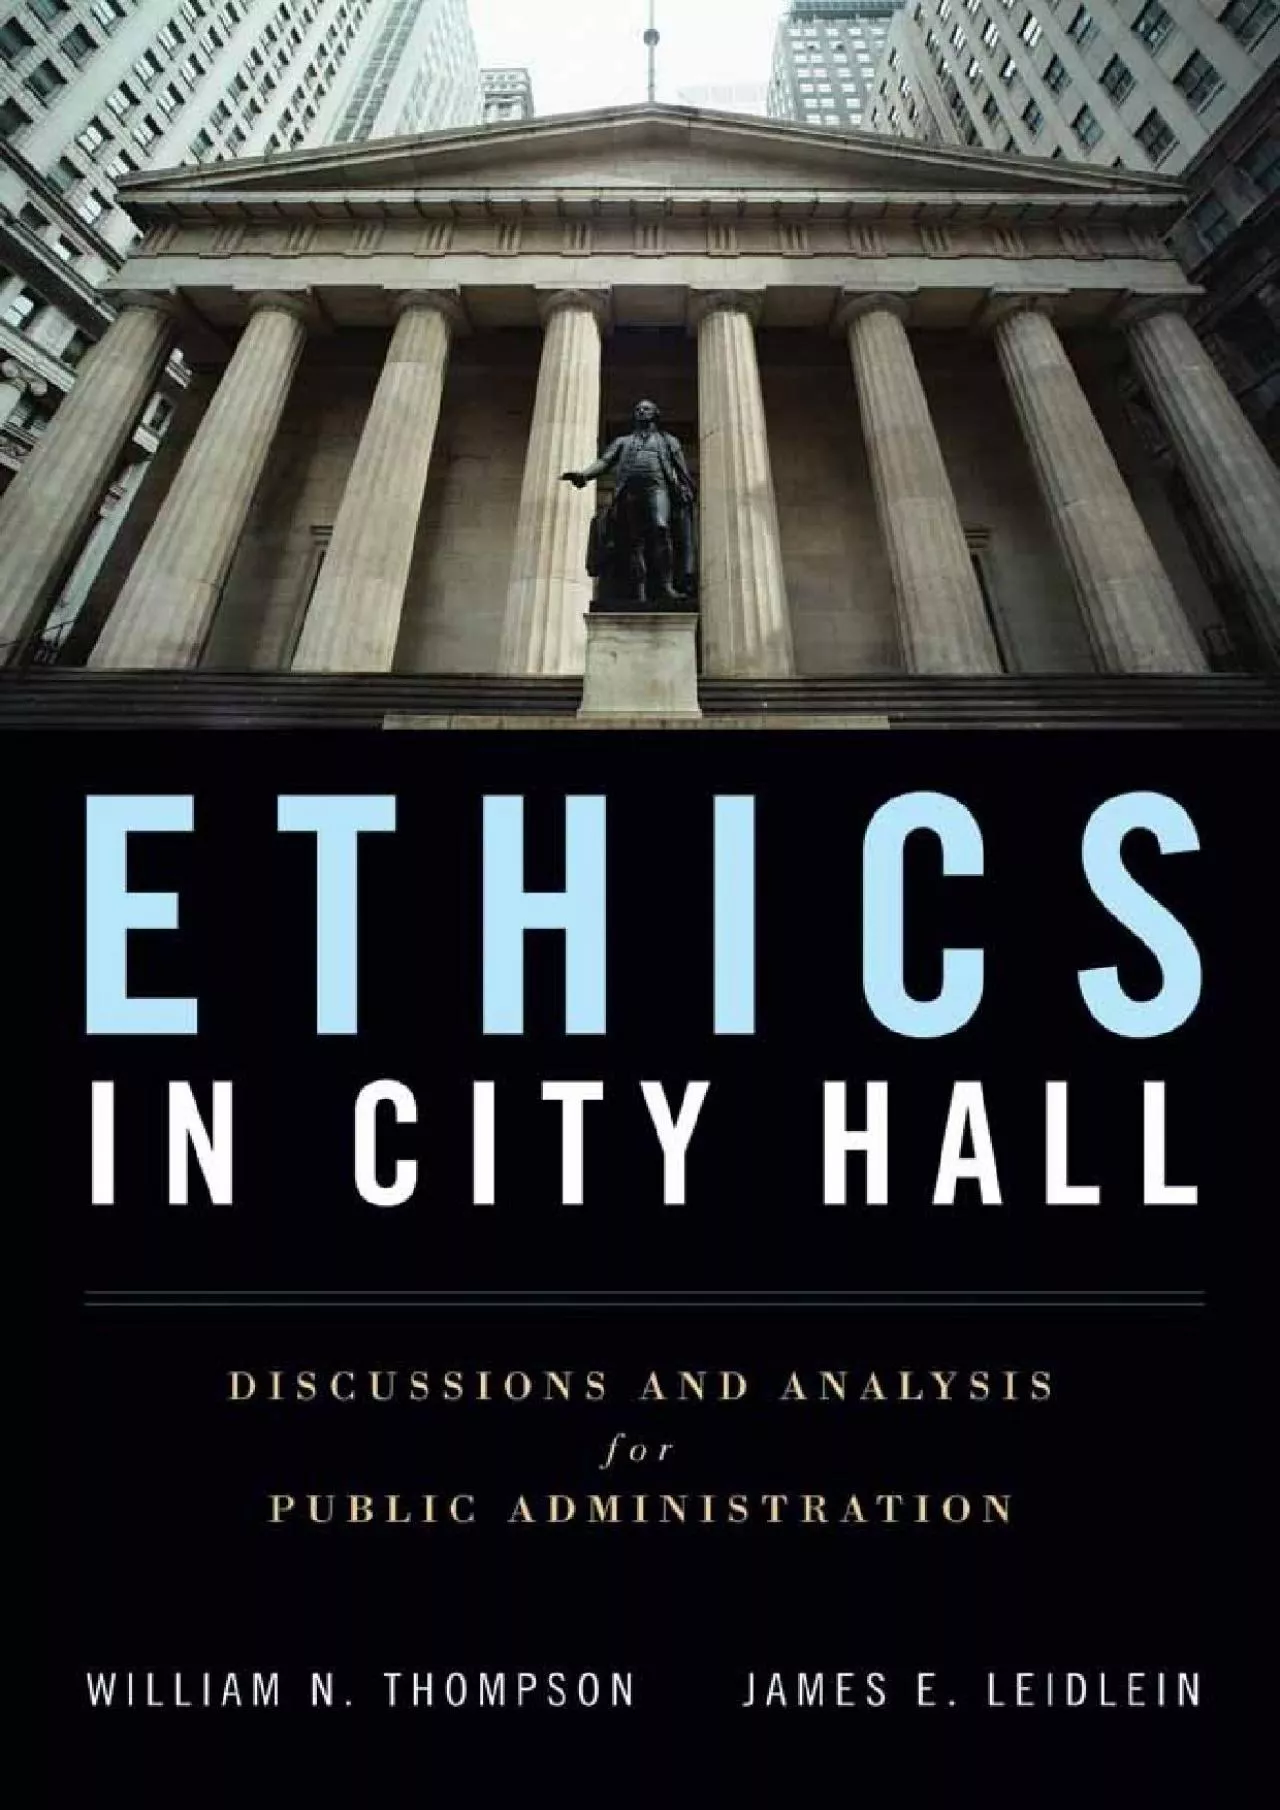 (EBOOK)-Ethics in City Hall: Discussion and Analysis for Public Administration: Discussion